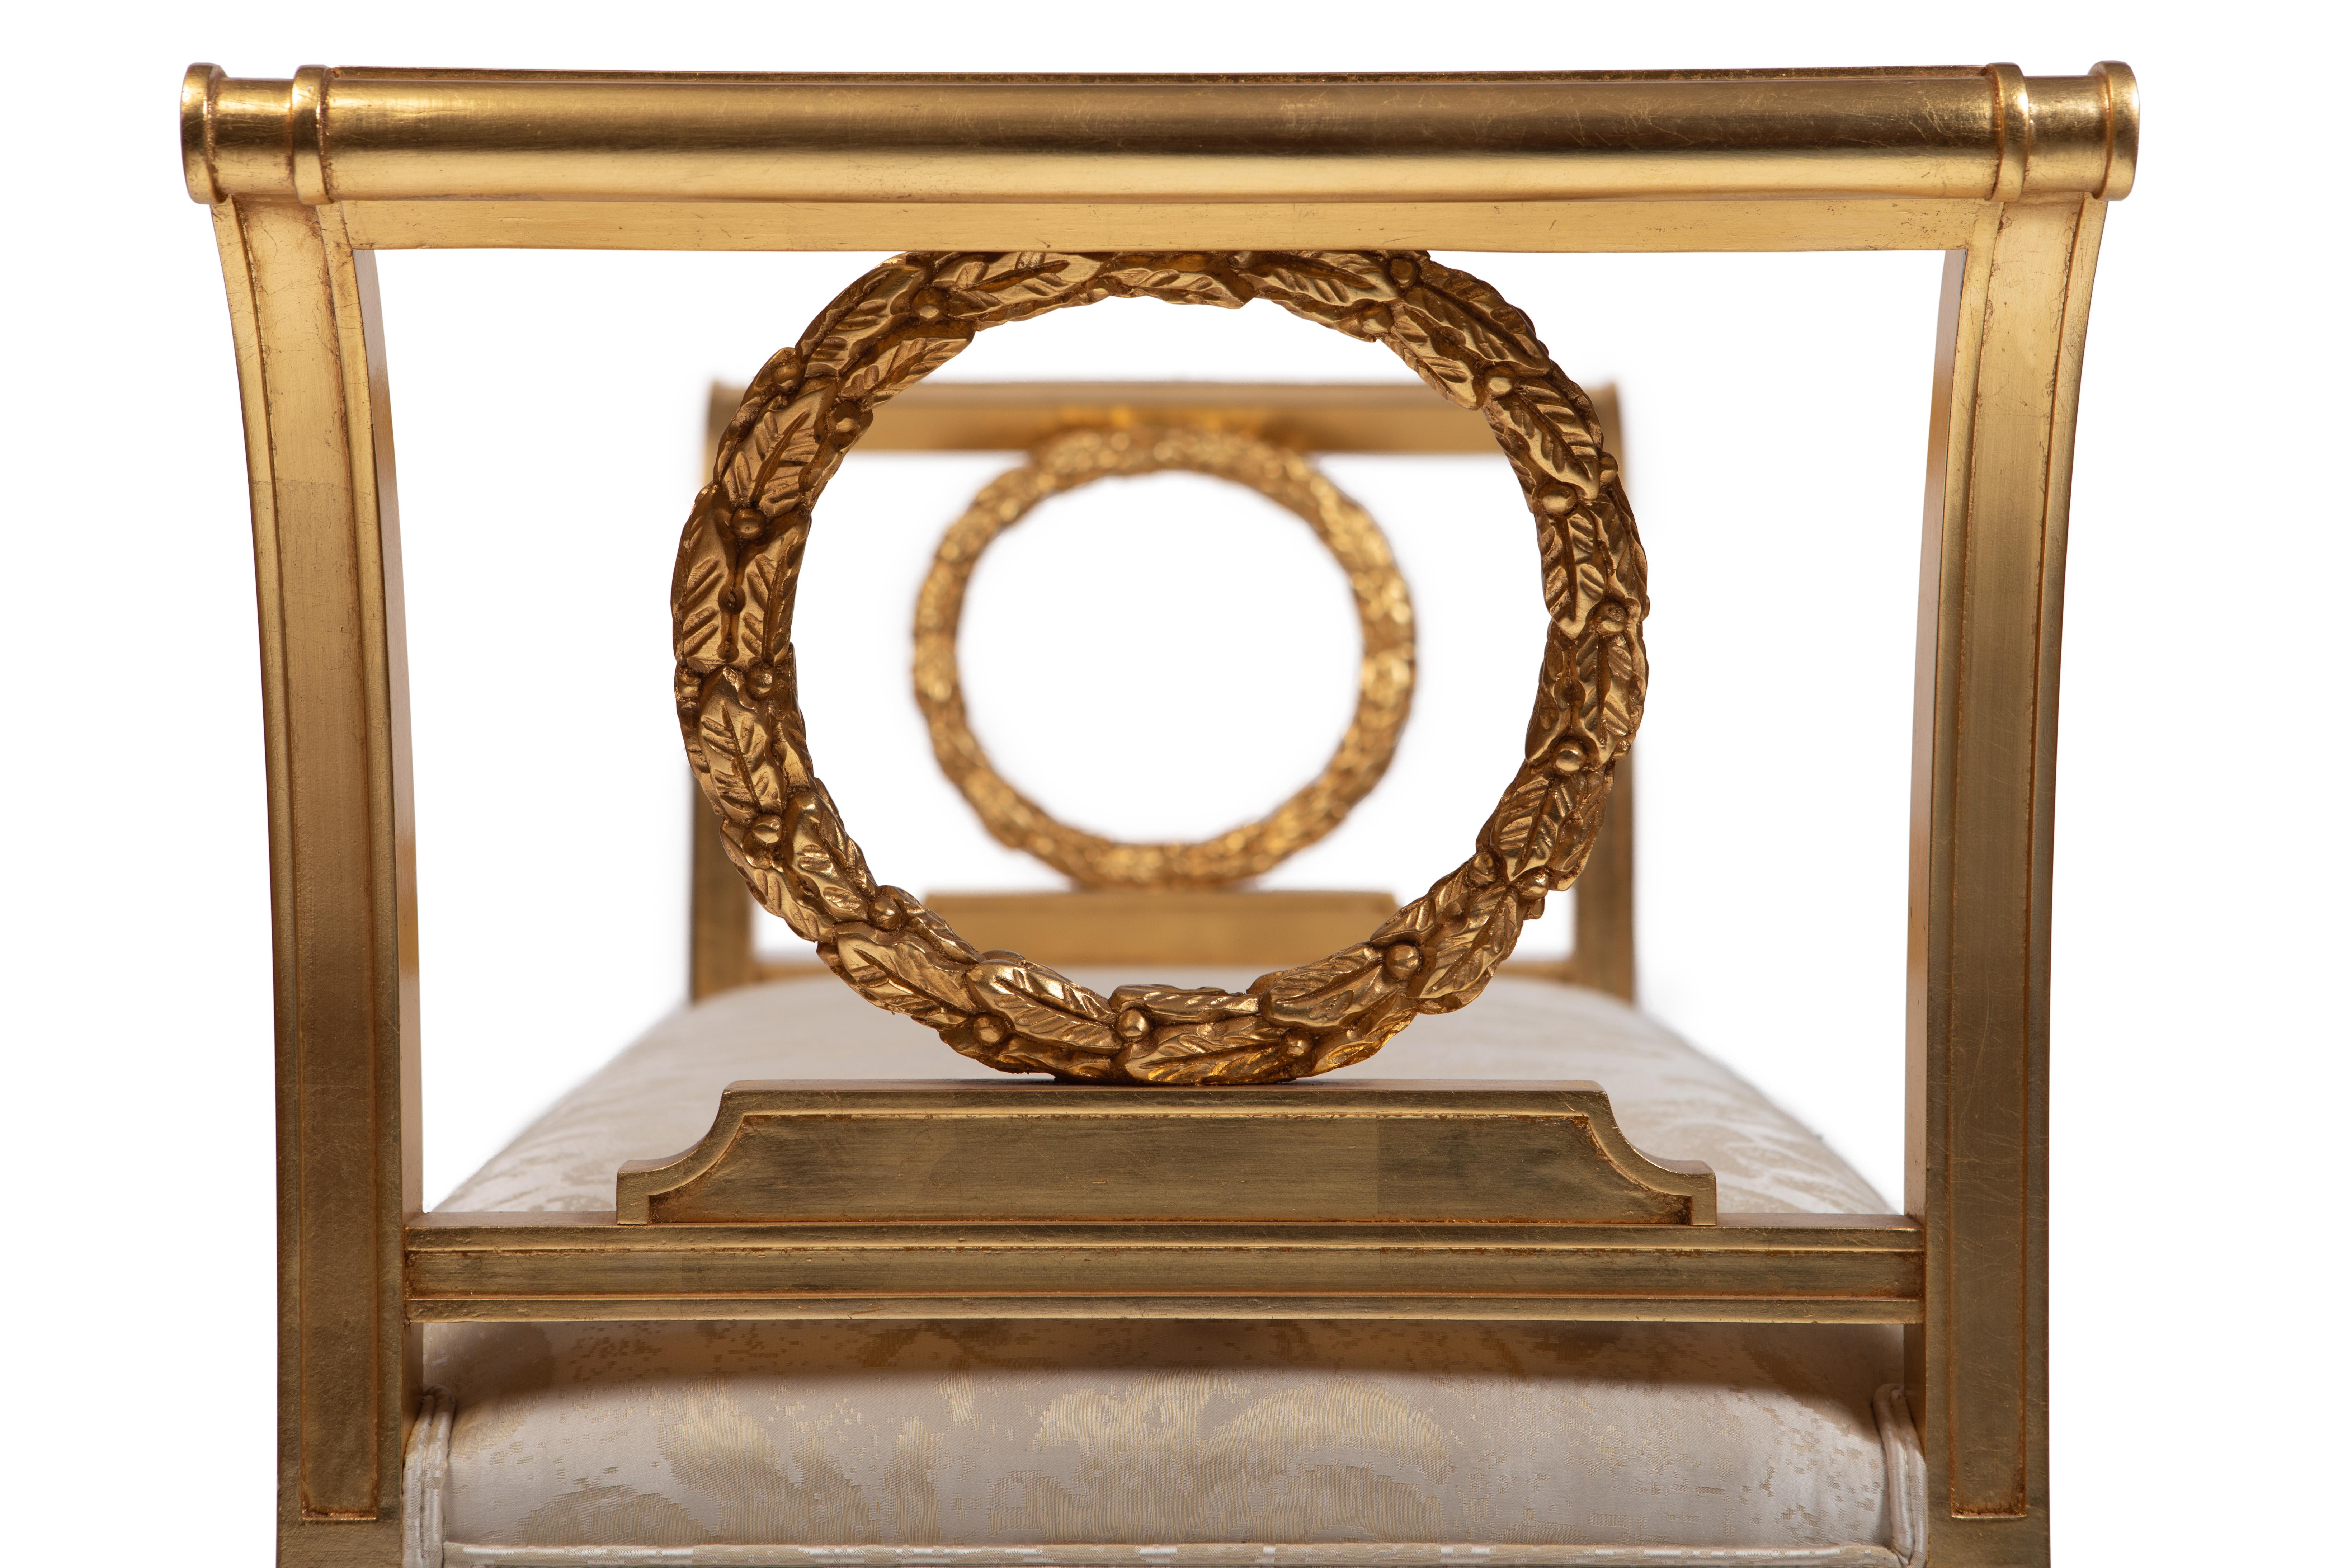 Italian Empire Style Wooden Bench, Gold Leaf Finishing, Handcarved and Made in Italy For Sale